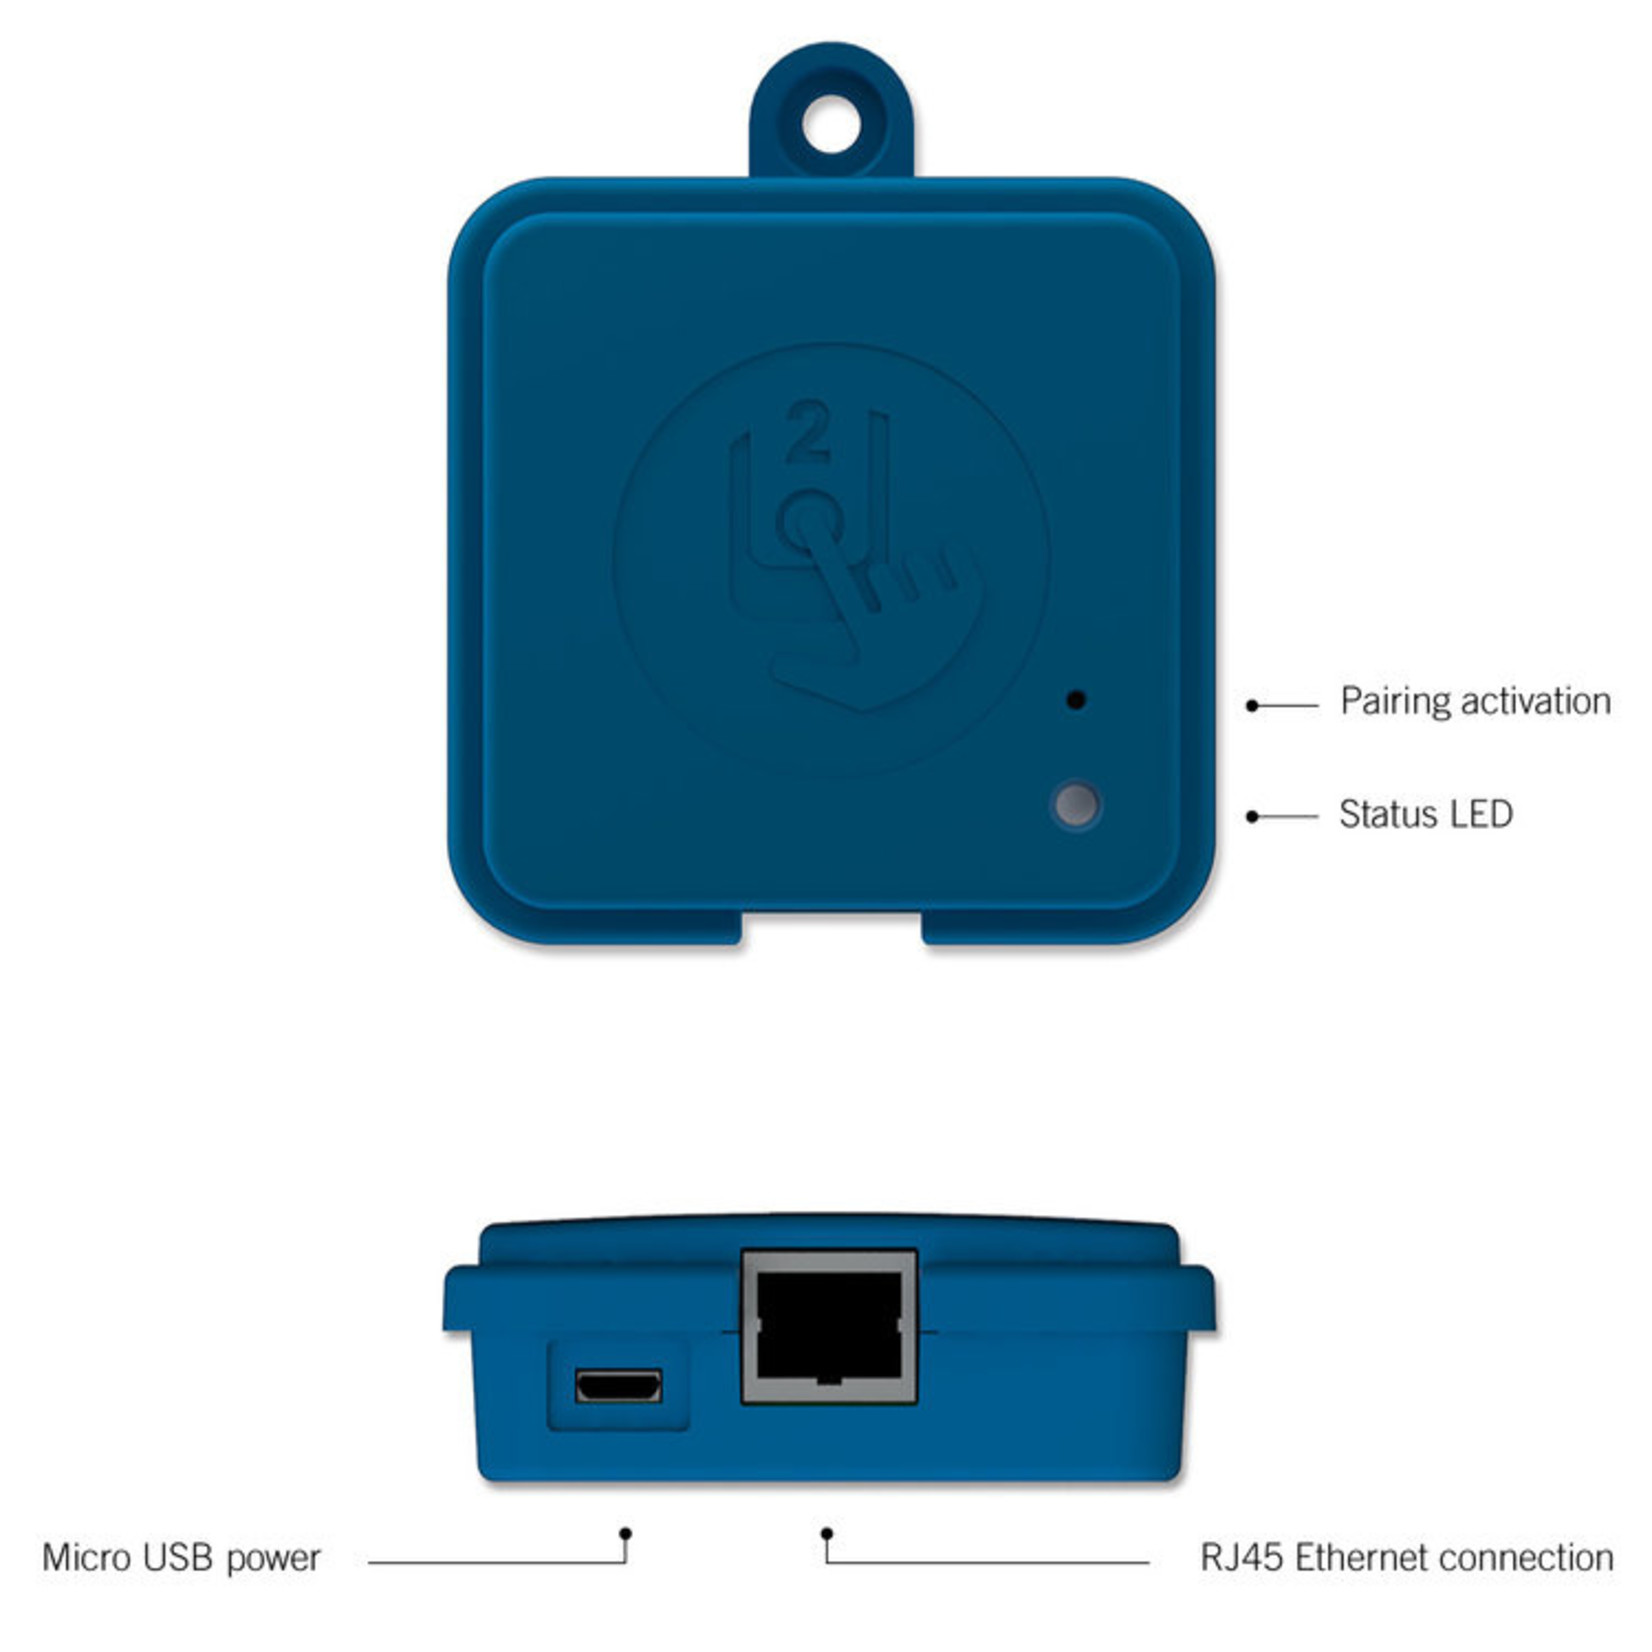 BeWell Spas Canada in.touch 2 Gecko WiFi Module Kit